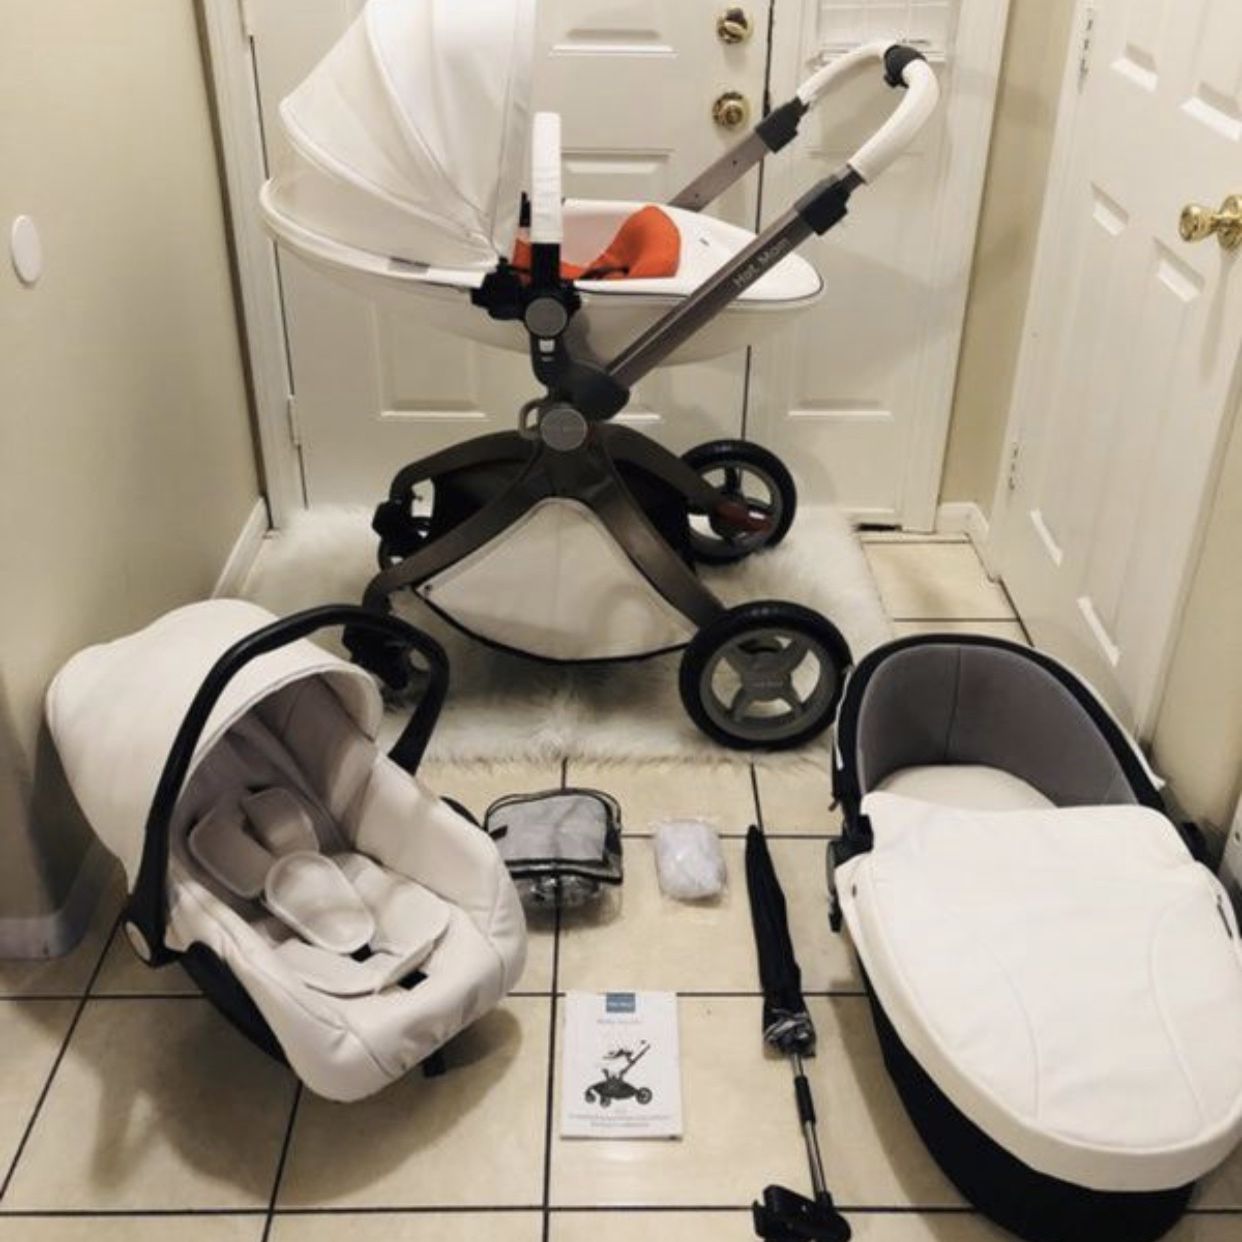 Luxury White Leather Stroller Set Including Bassinet; Car seat New Winter Cover & Umbrella 